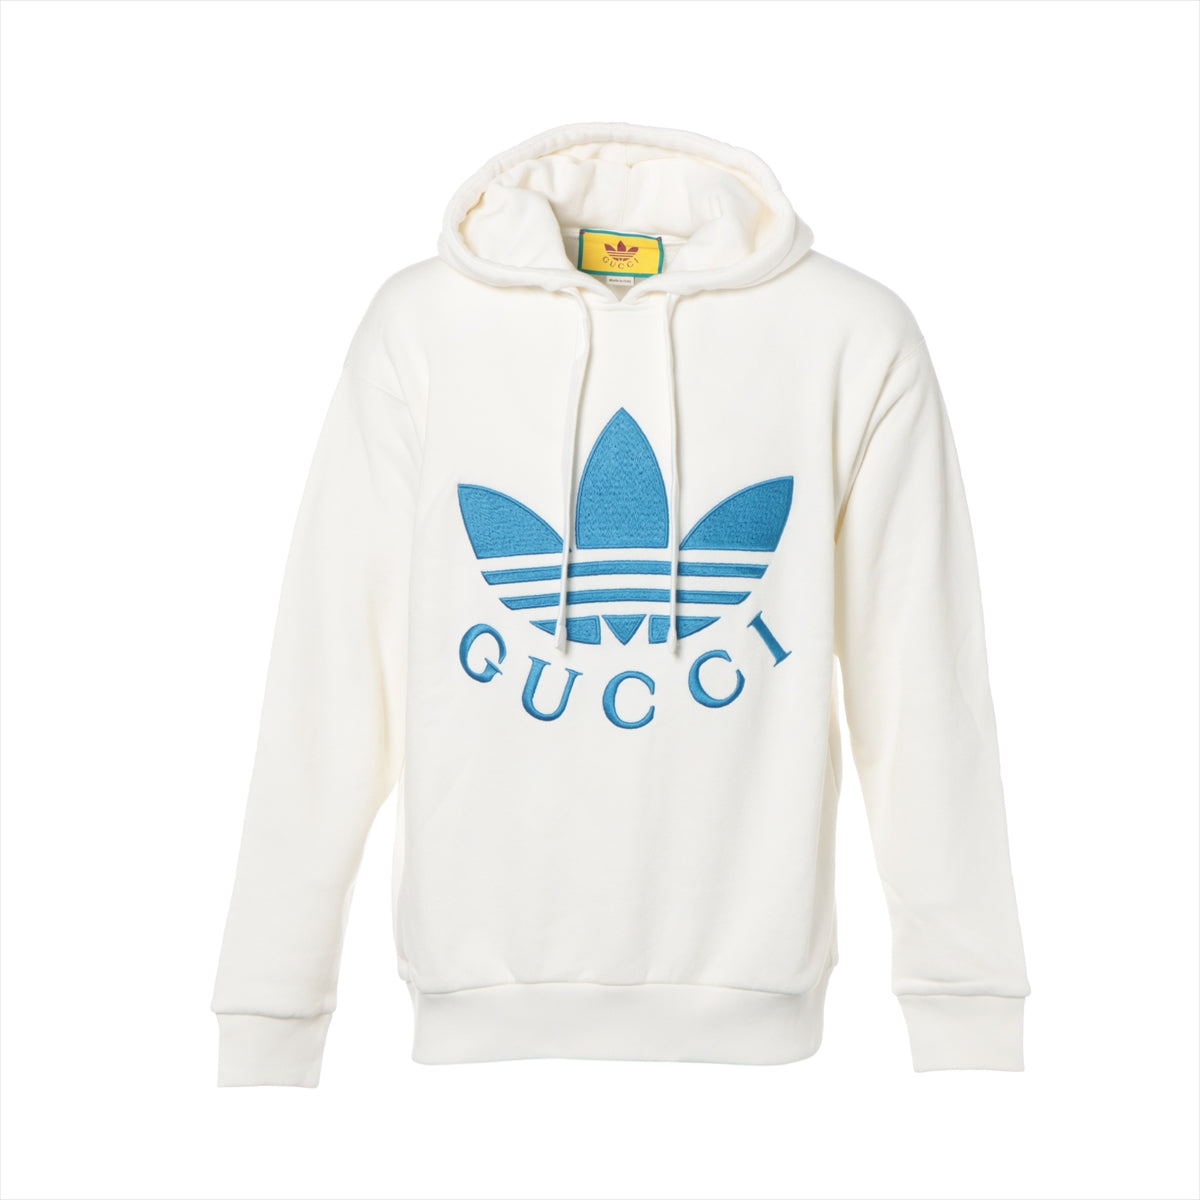 Gucci x adidas Cotton Parker XS Men's White  front logo embroidery pullover oversize 702607